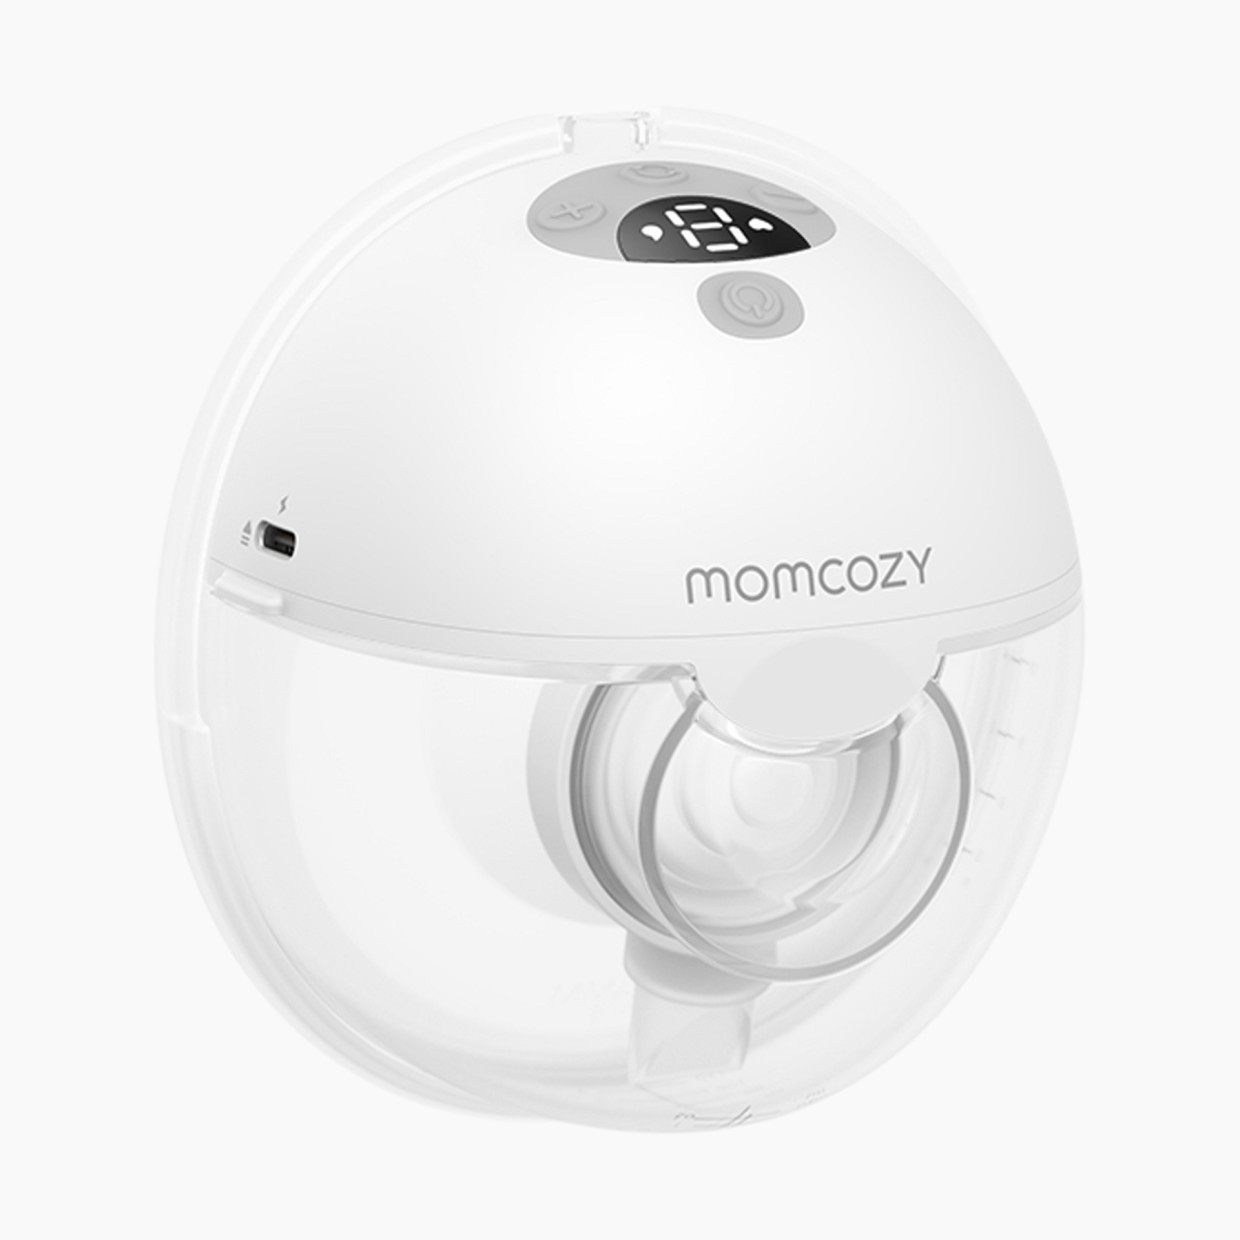 Momcozy M5 White Hands Free Wearable Breast Pump With Manual